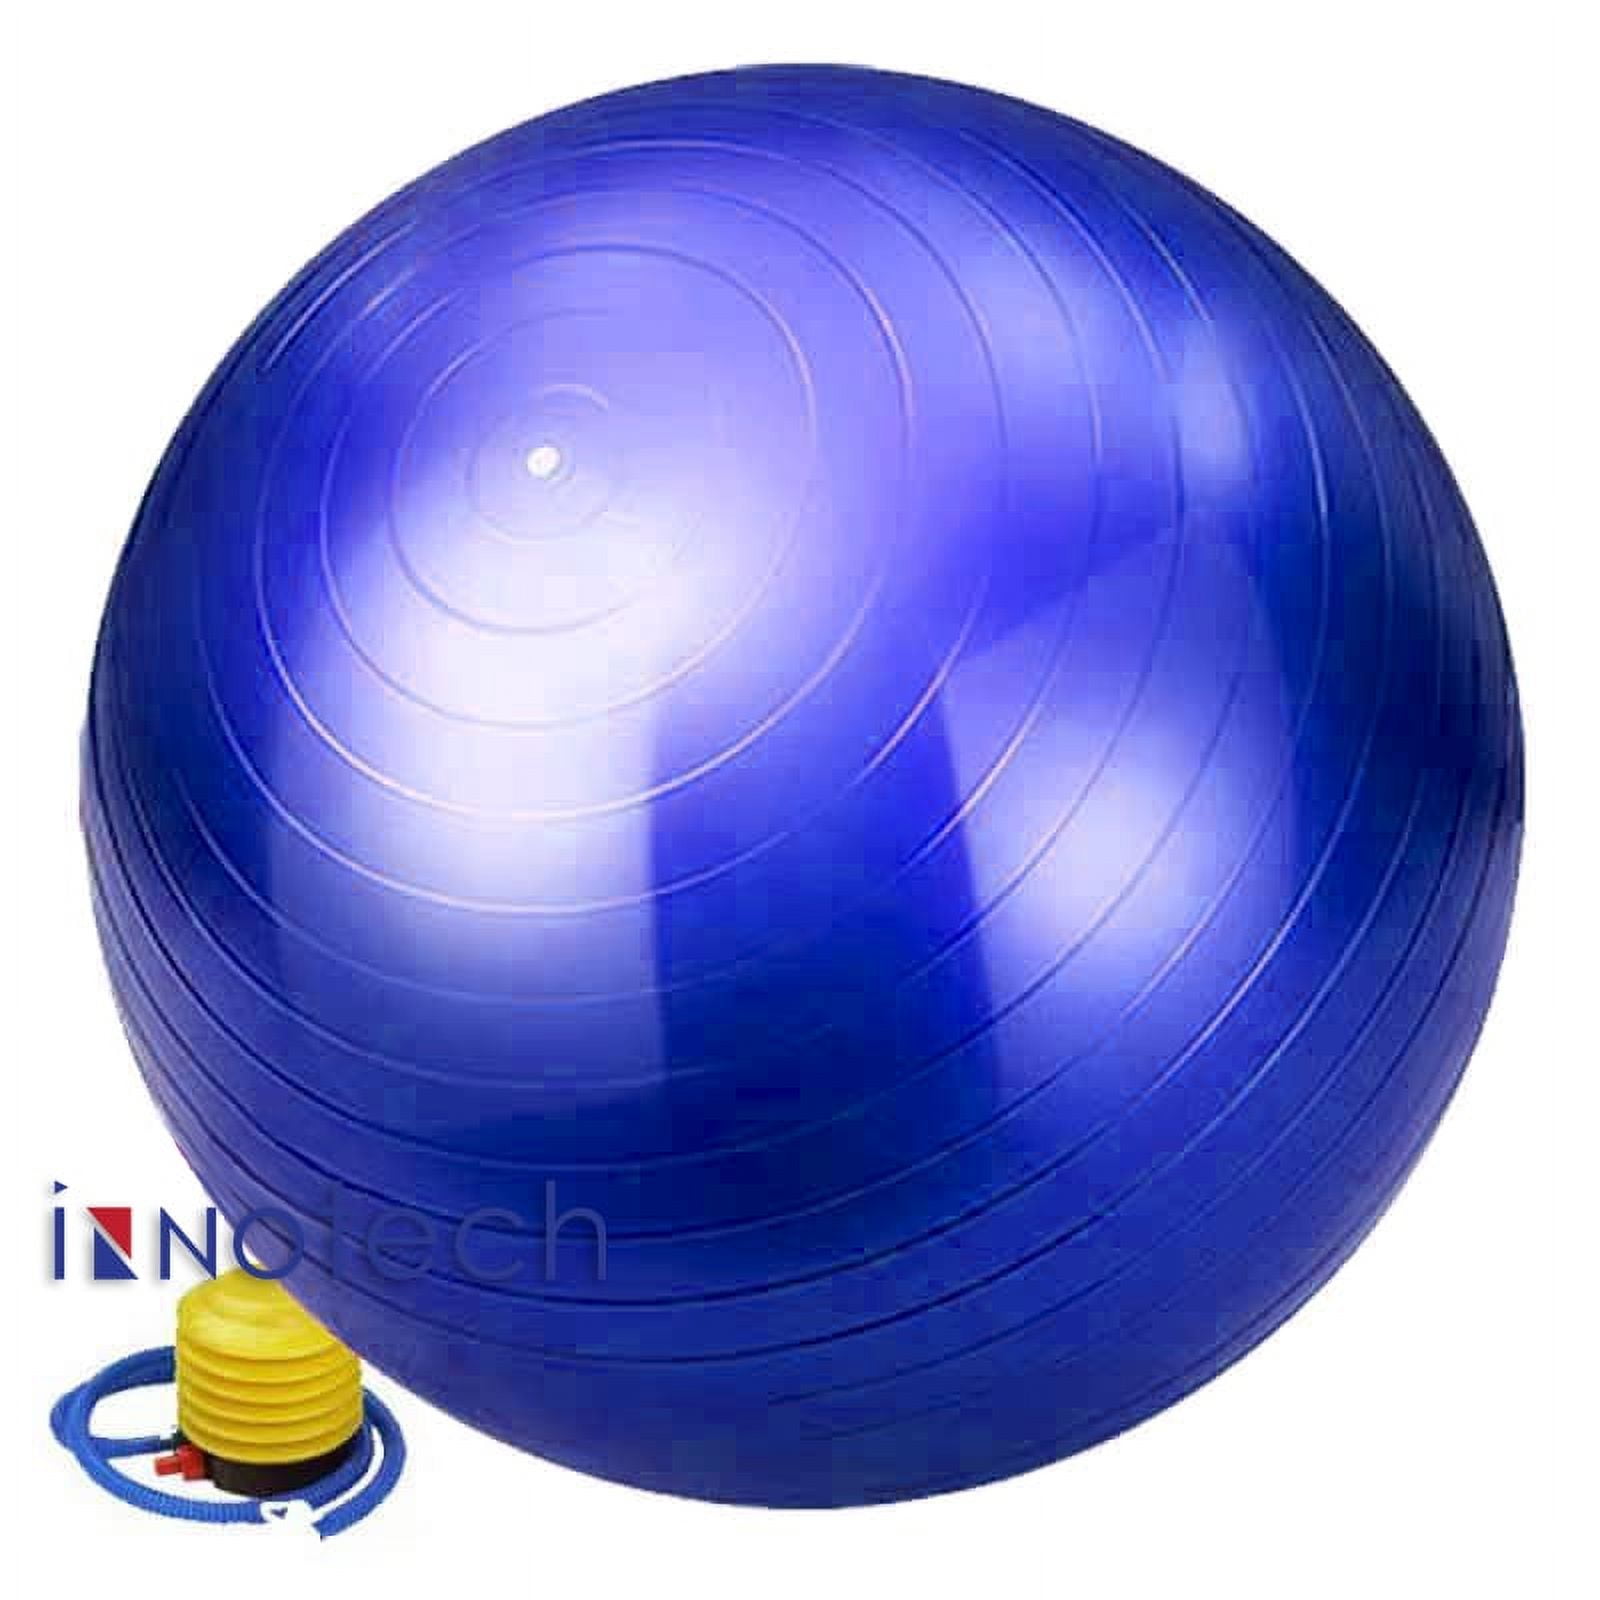 OUNONA 85cm 1000g Professional Anti Burst Stability Yoga Ball Thicken  Balancing Devcie Exercise Tool for Fitness Gym Workouts with Pump Air Clamp